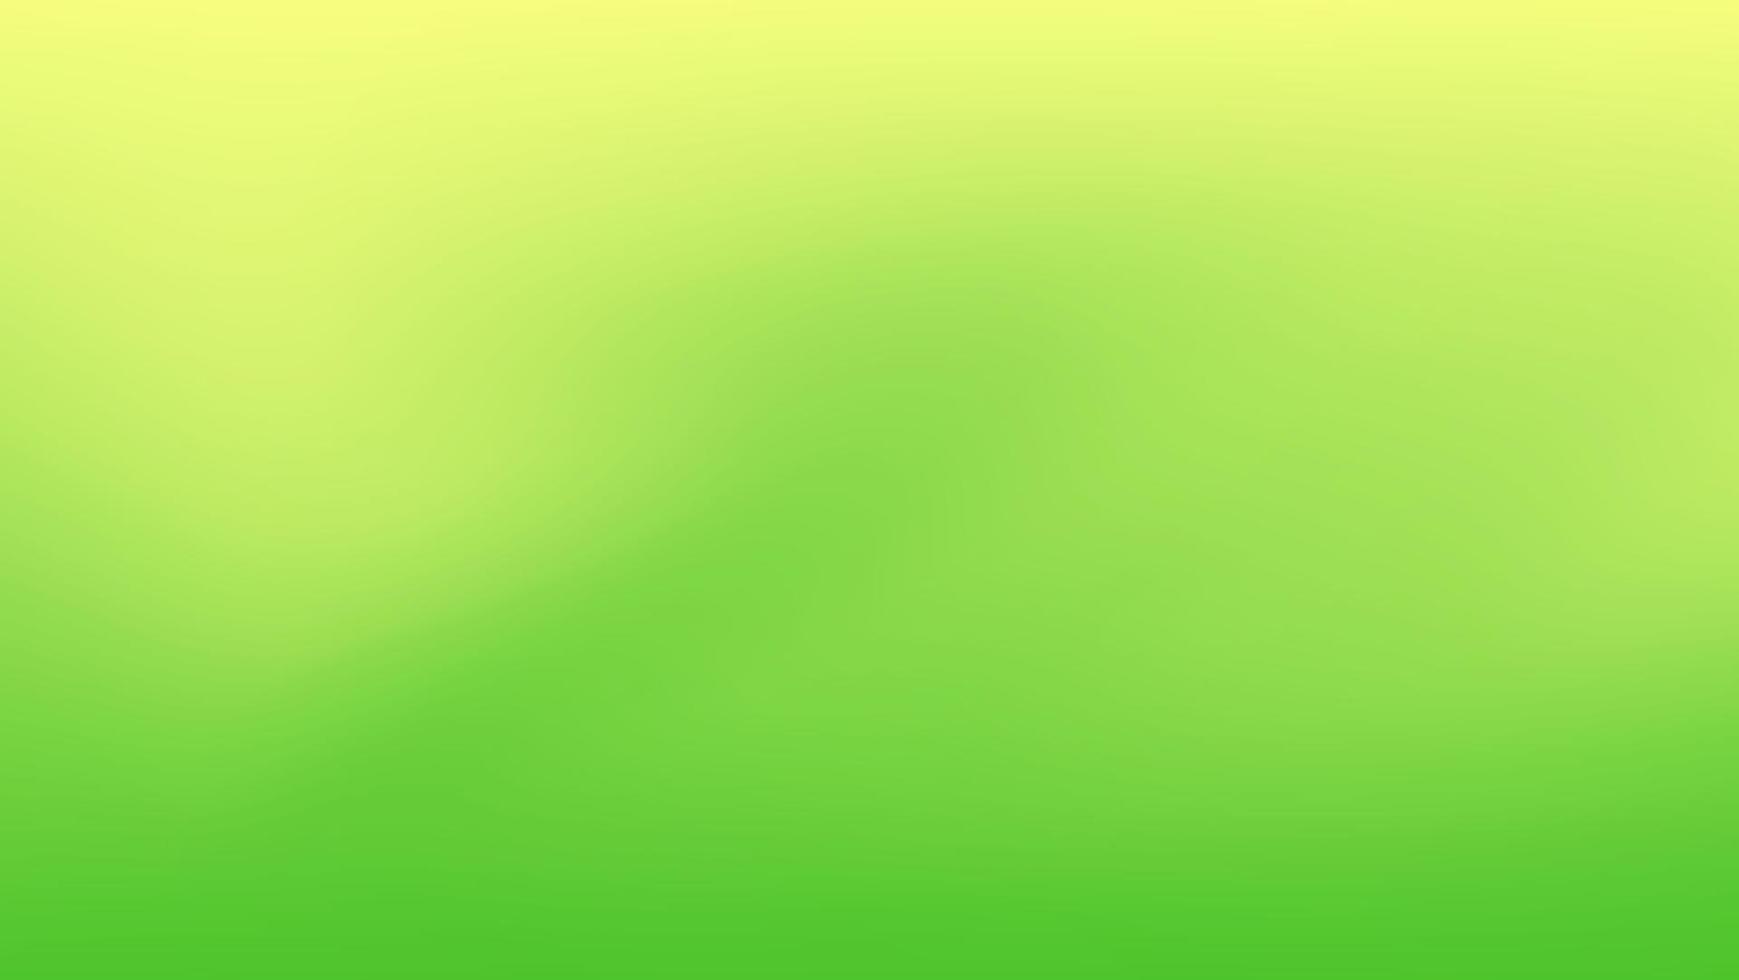 Abstract Green and Yellow Gradient Mesh Background. vector